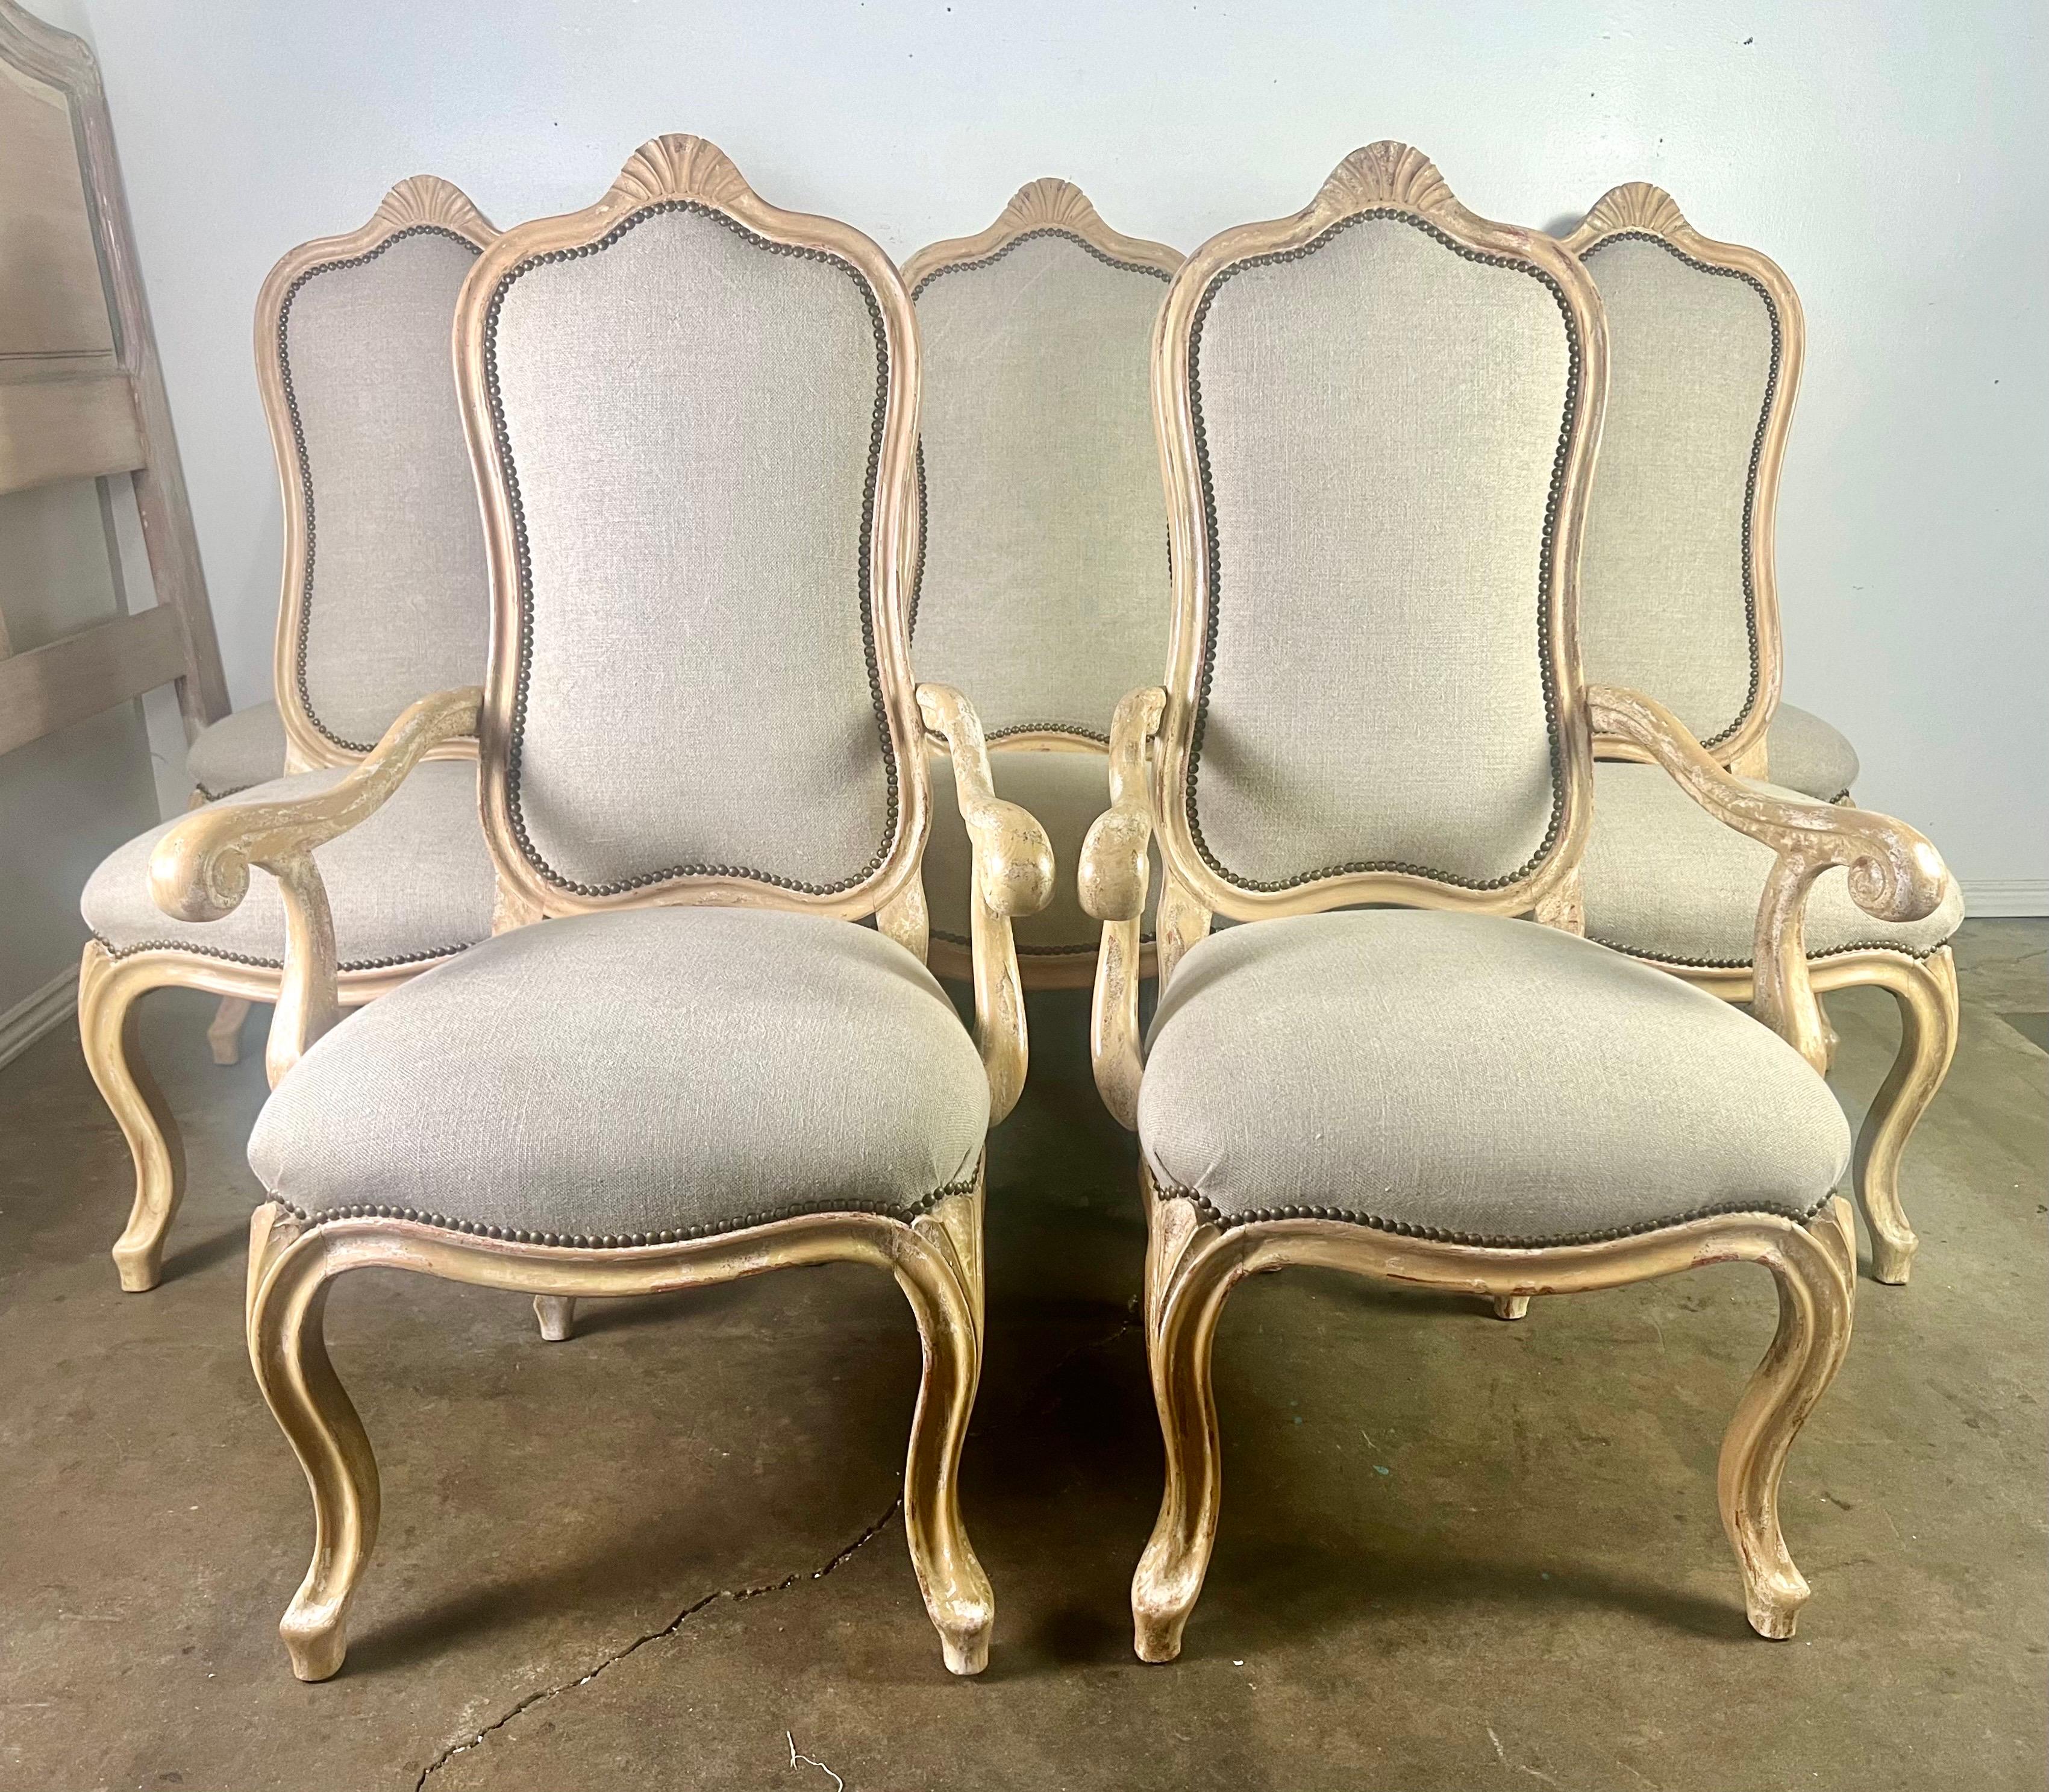 Set of eight French Louis XV style dining chairs with Belgian linen upholstery.  The bleaching process gives them a fabulous and contemporary appeal while still showcasing their classic elegance.